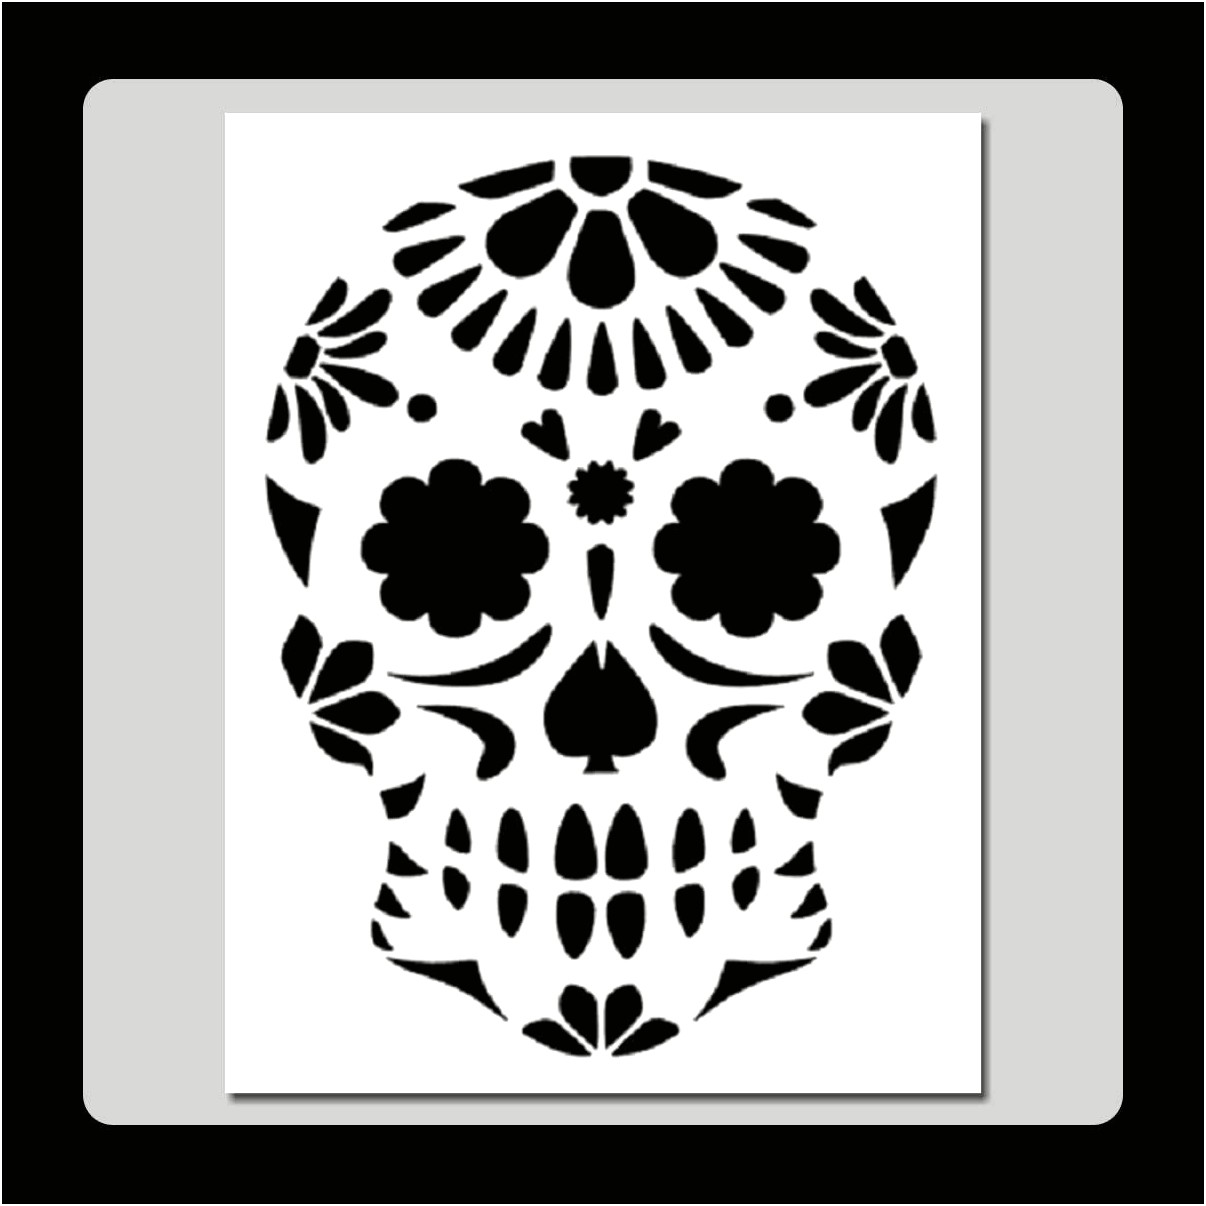 Free Pumpkin Carving Day Of The Dead Templates